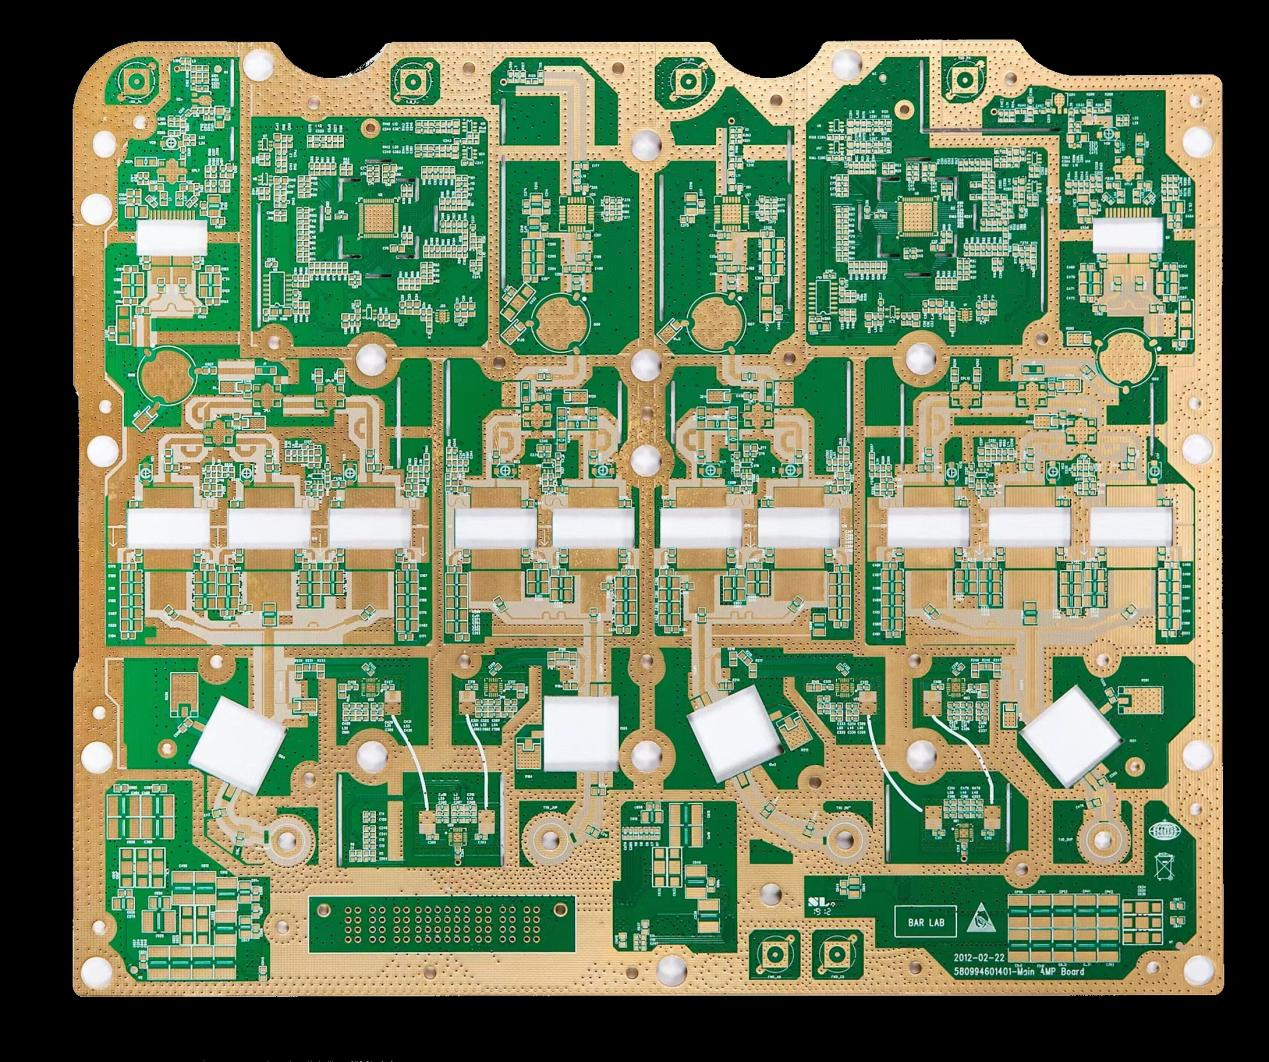 Development opportunities and challenges of flexible PCB